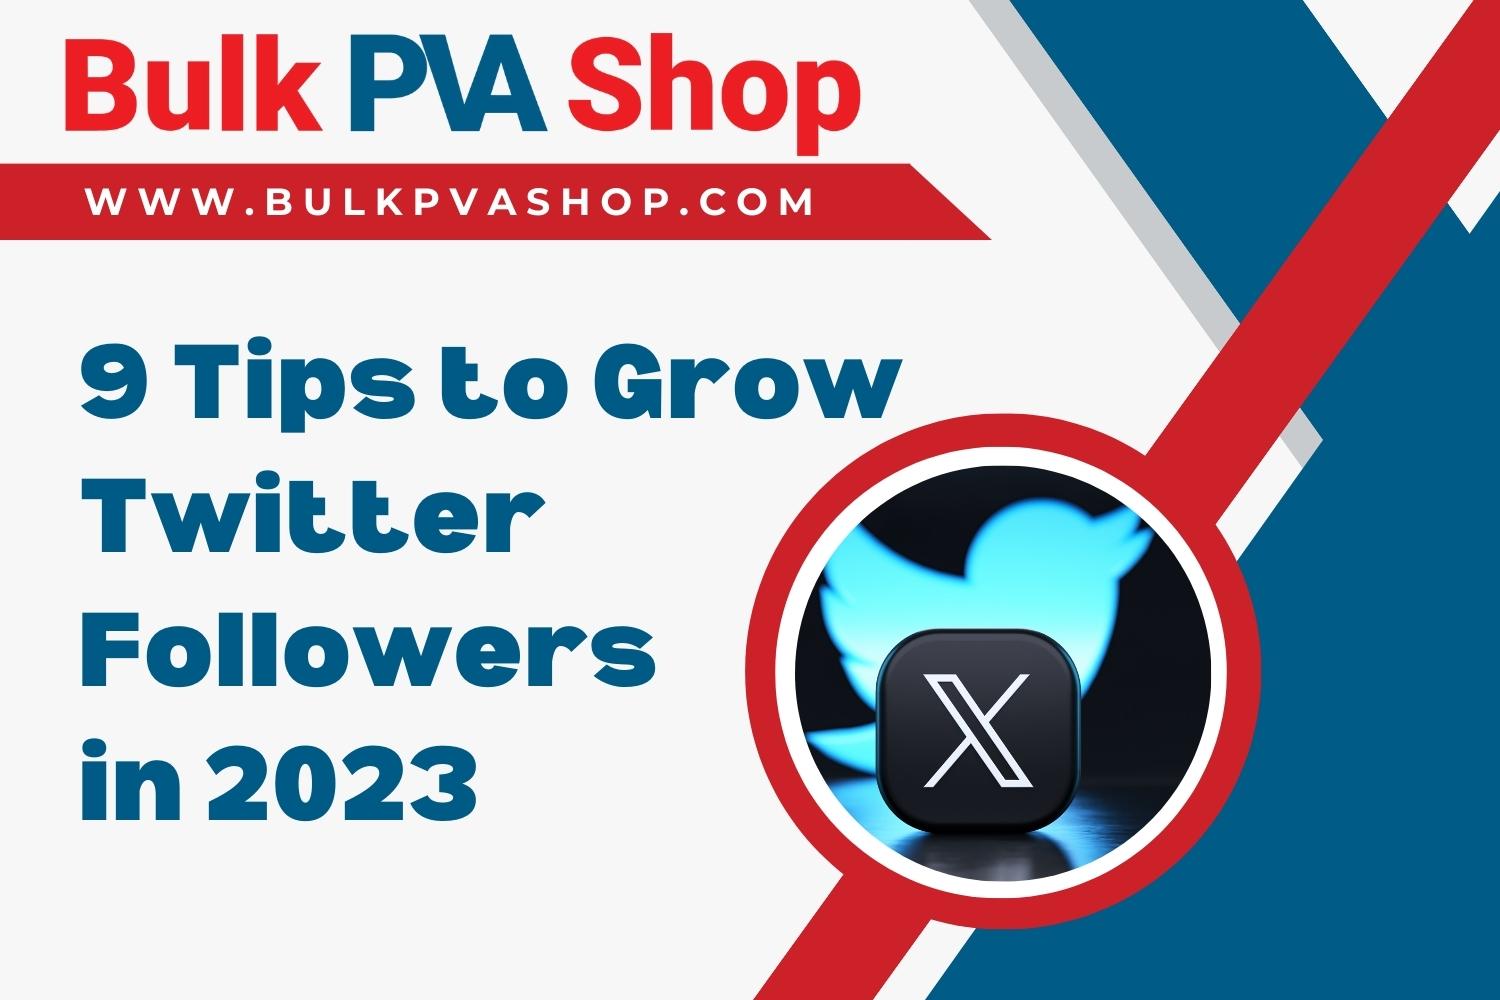 9 Tips to Grow Twitter Followers in 2023